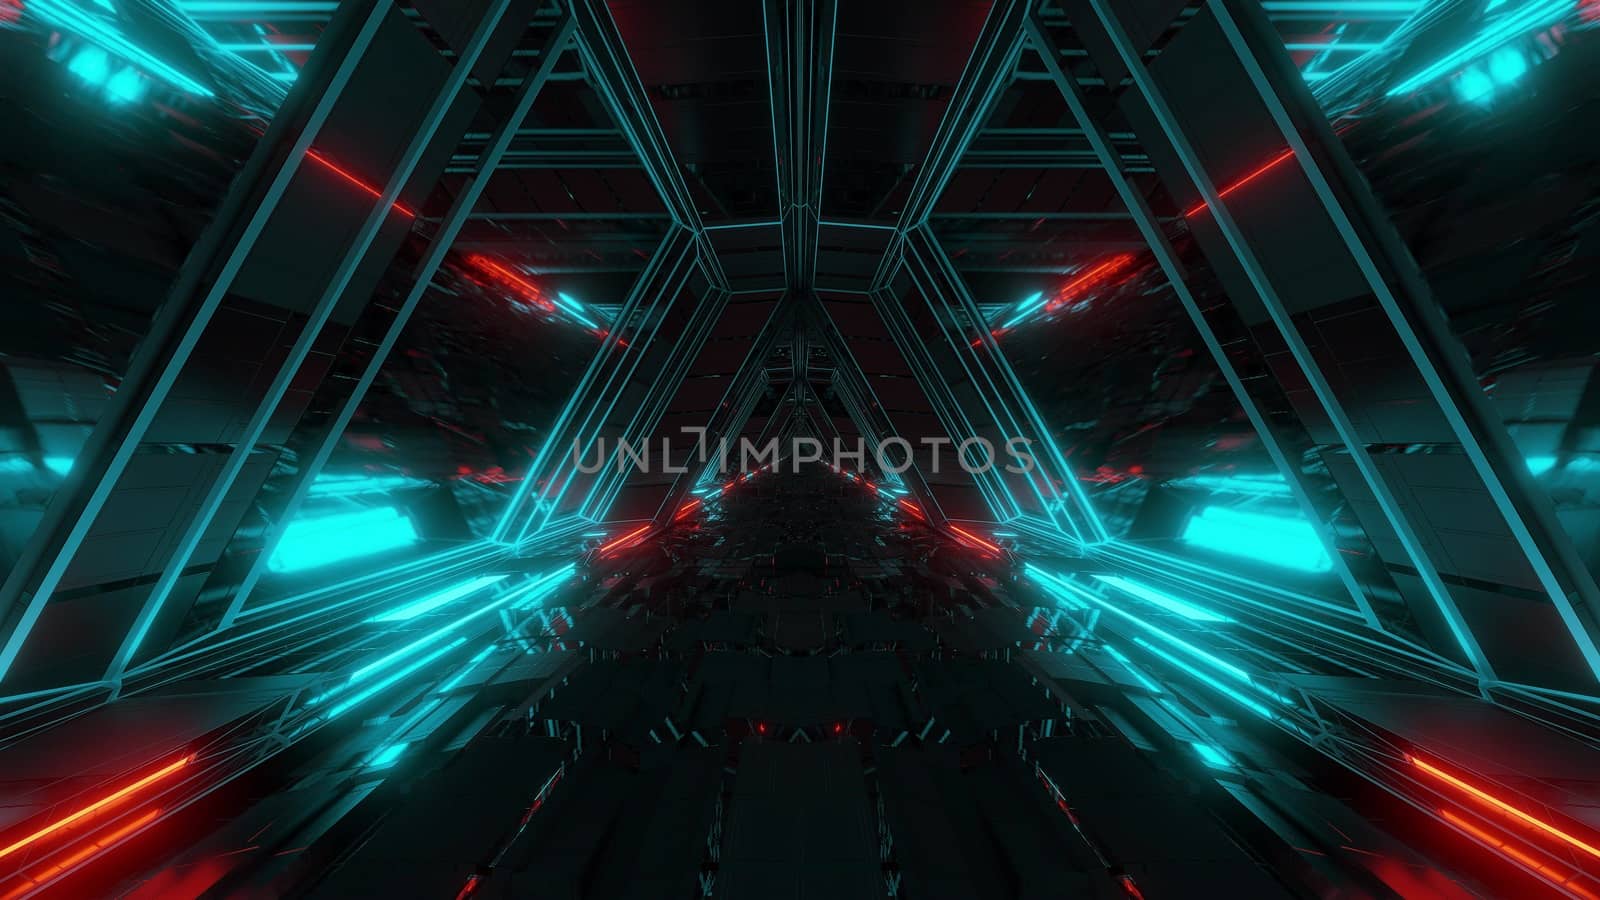 futuristic sci-fi space war ship hangar tunnel corridor with reflective glass windows 3d illustration background wallpaper by tunnelmotions